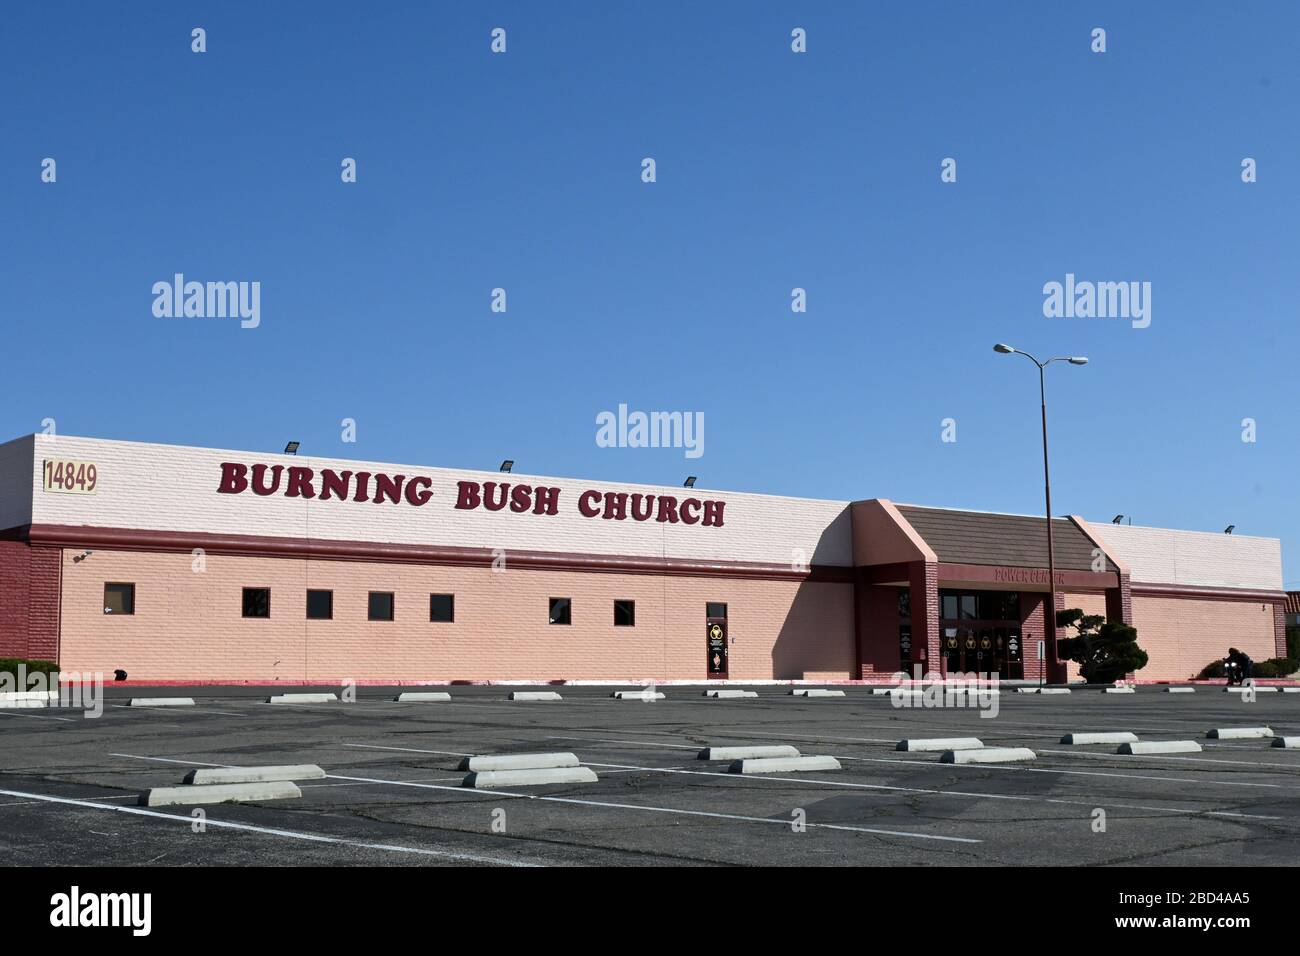 California, USA. 04 April 2020: General overall view of the Burning Bush Church amid the global coronavirus COVID-19 epidemic, Saturday, April 4, 2020, in Victorville, California, USA. (Photo by IOS/Espa-Images) Stock Photo